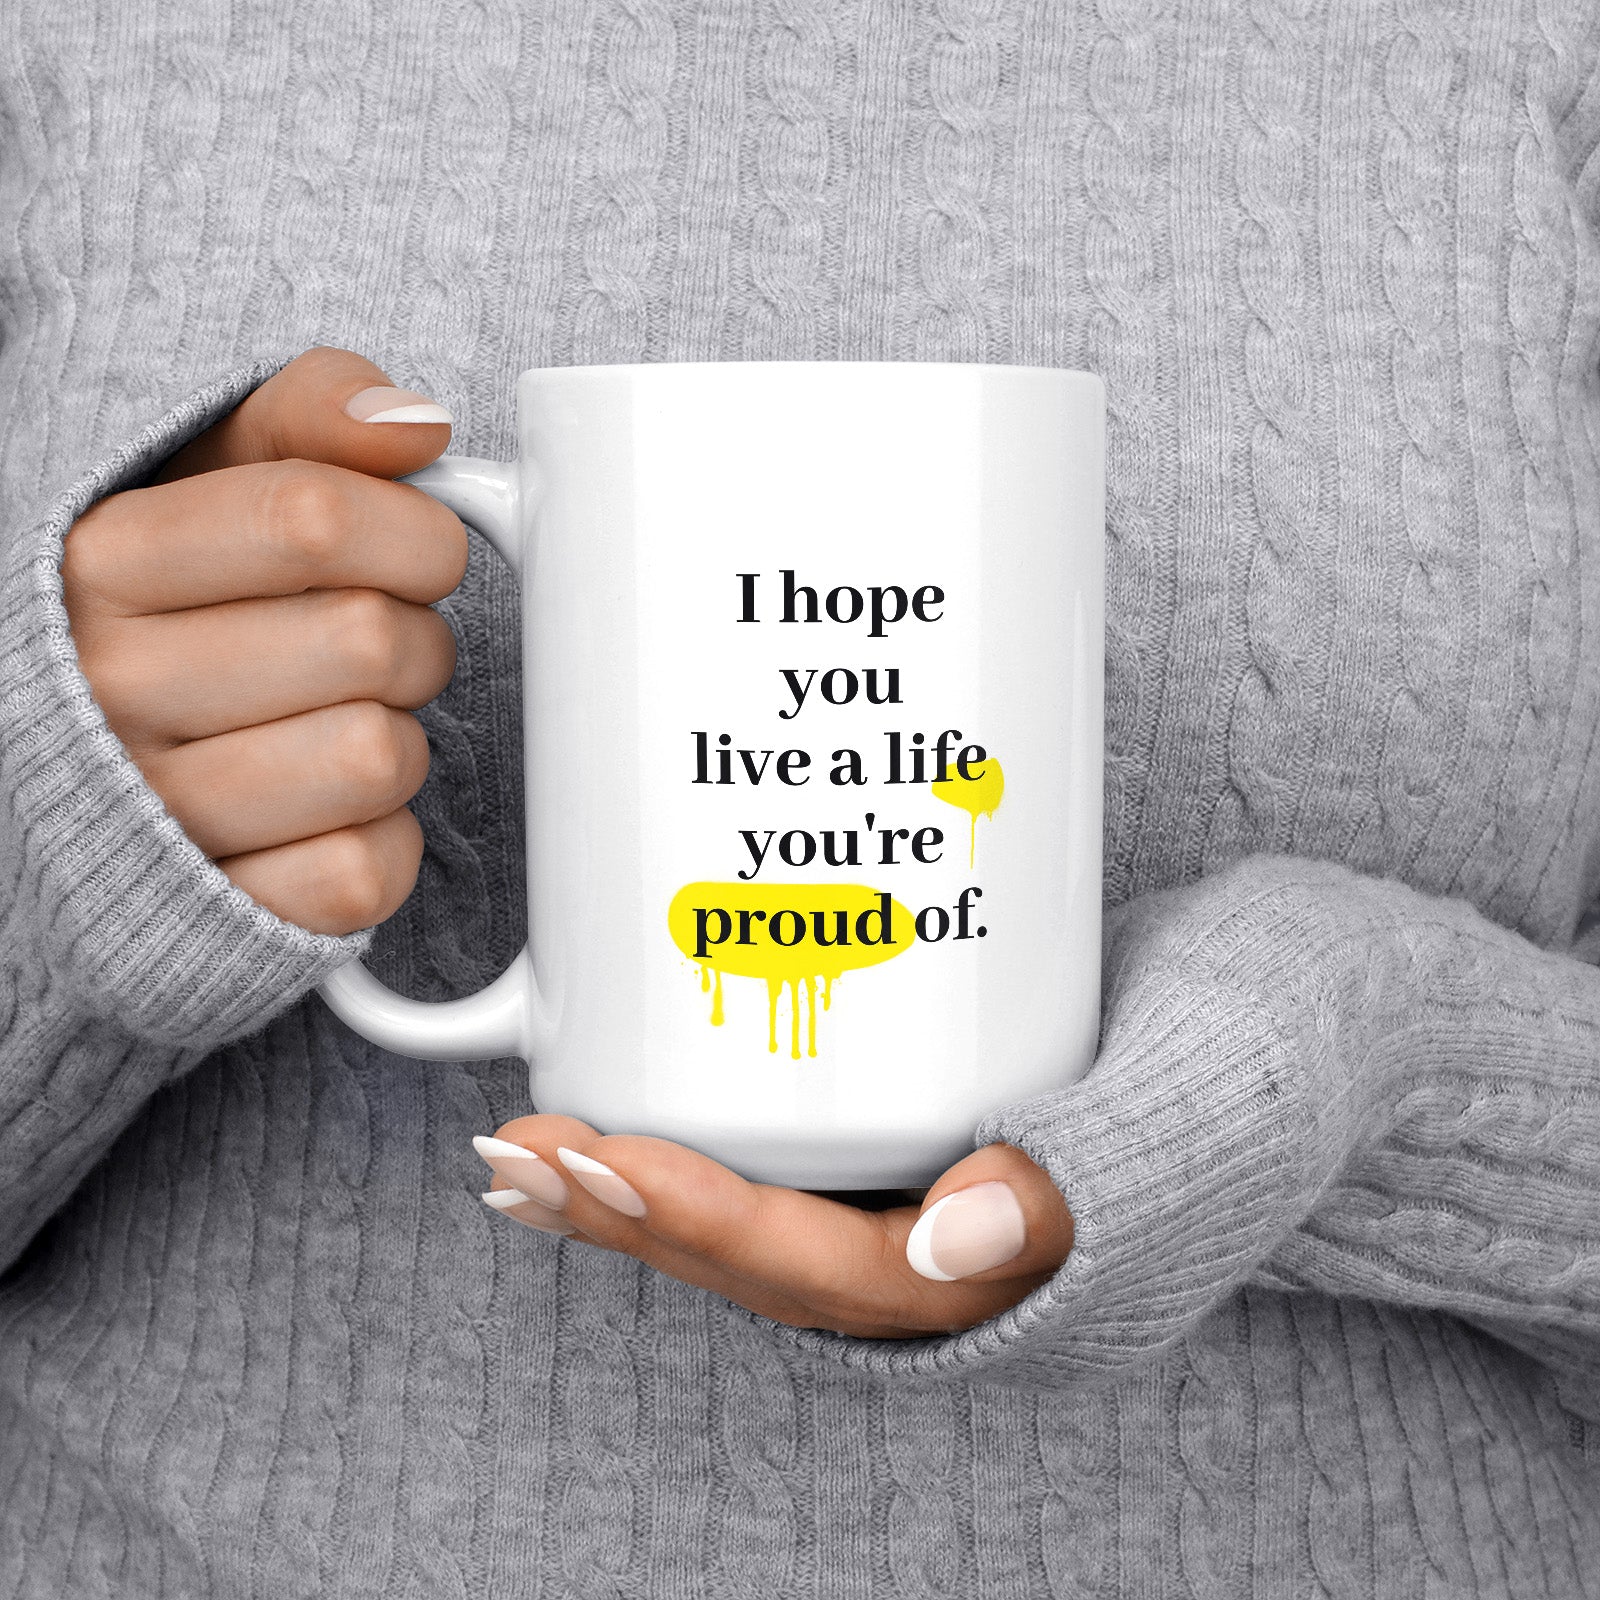 Be inspired by F. Scott Fitzgerald's famous quote, "I hope you live a life you're proud of" on this white and glossy 15oz coffee mug with the handle on the left.